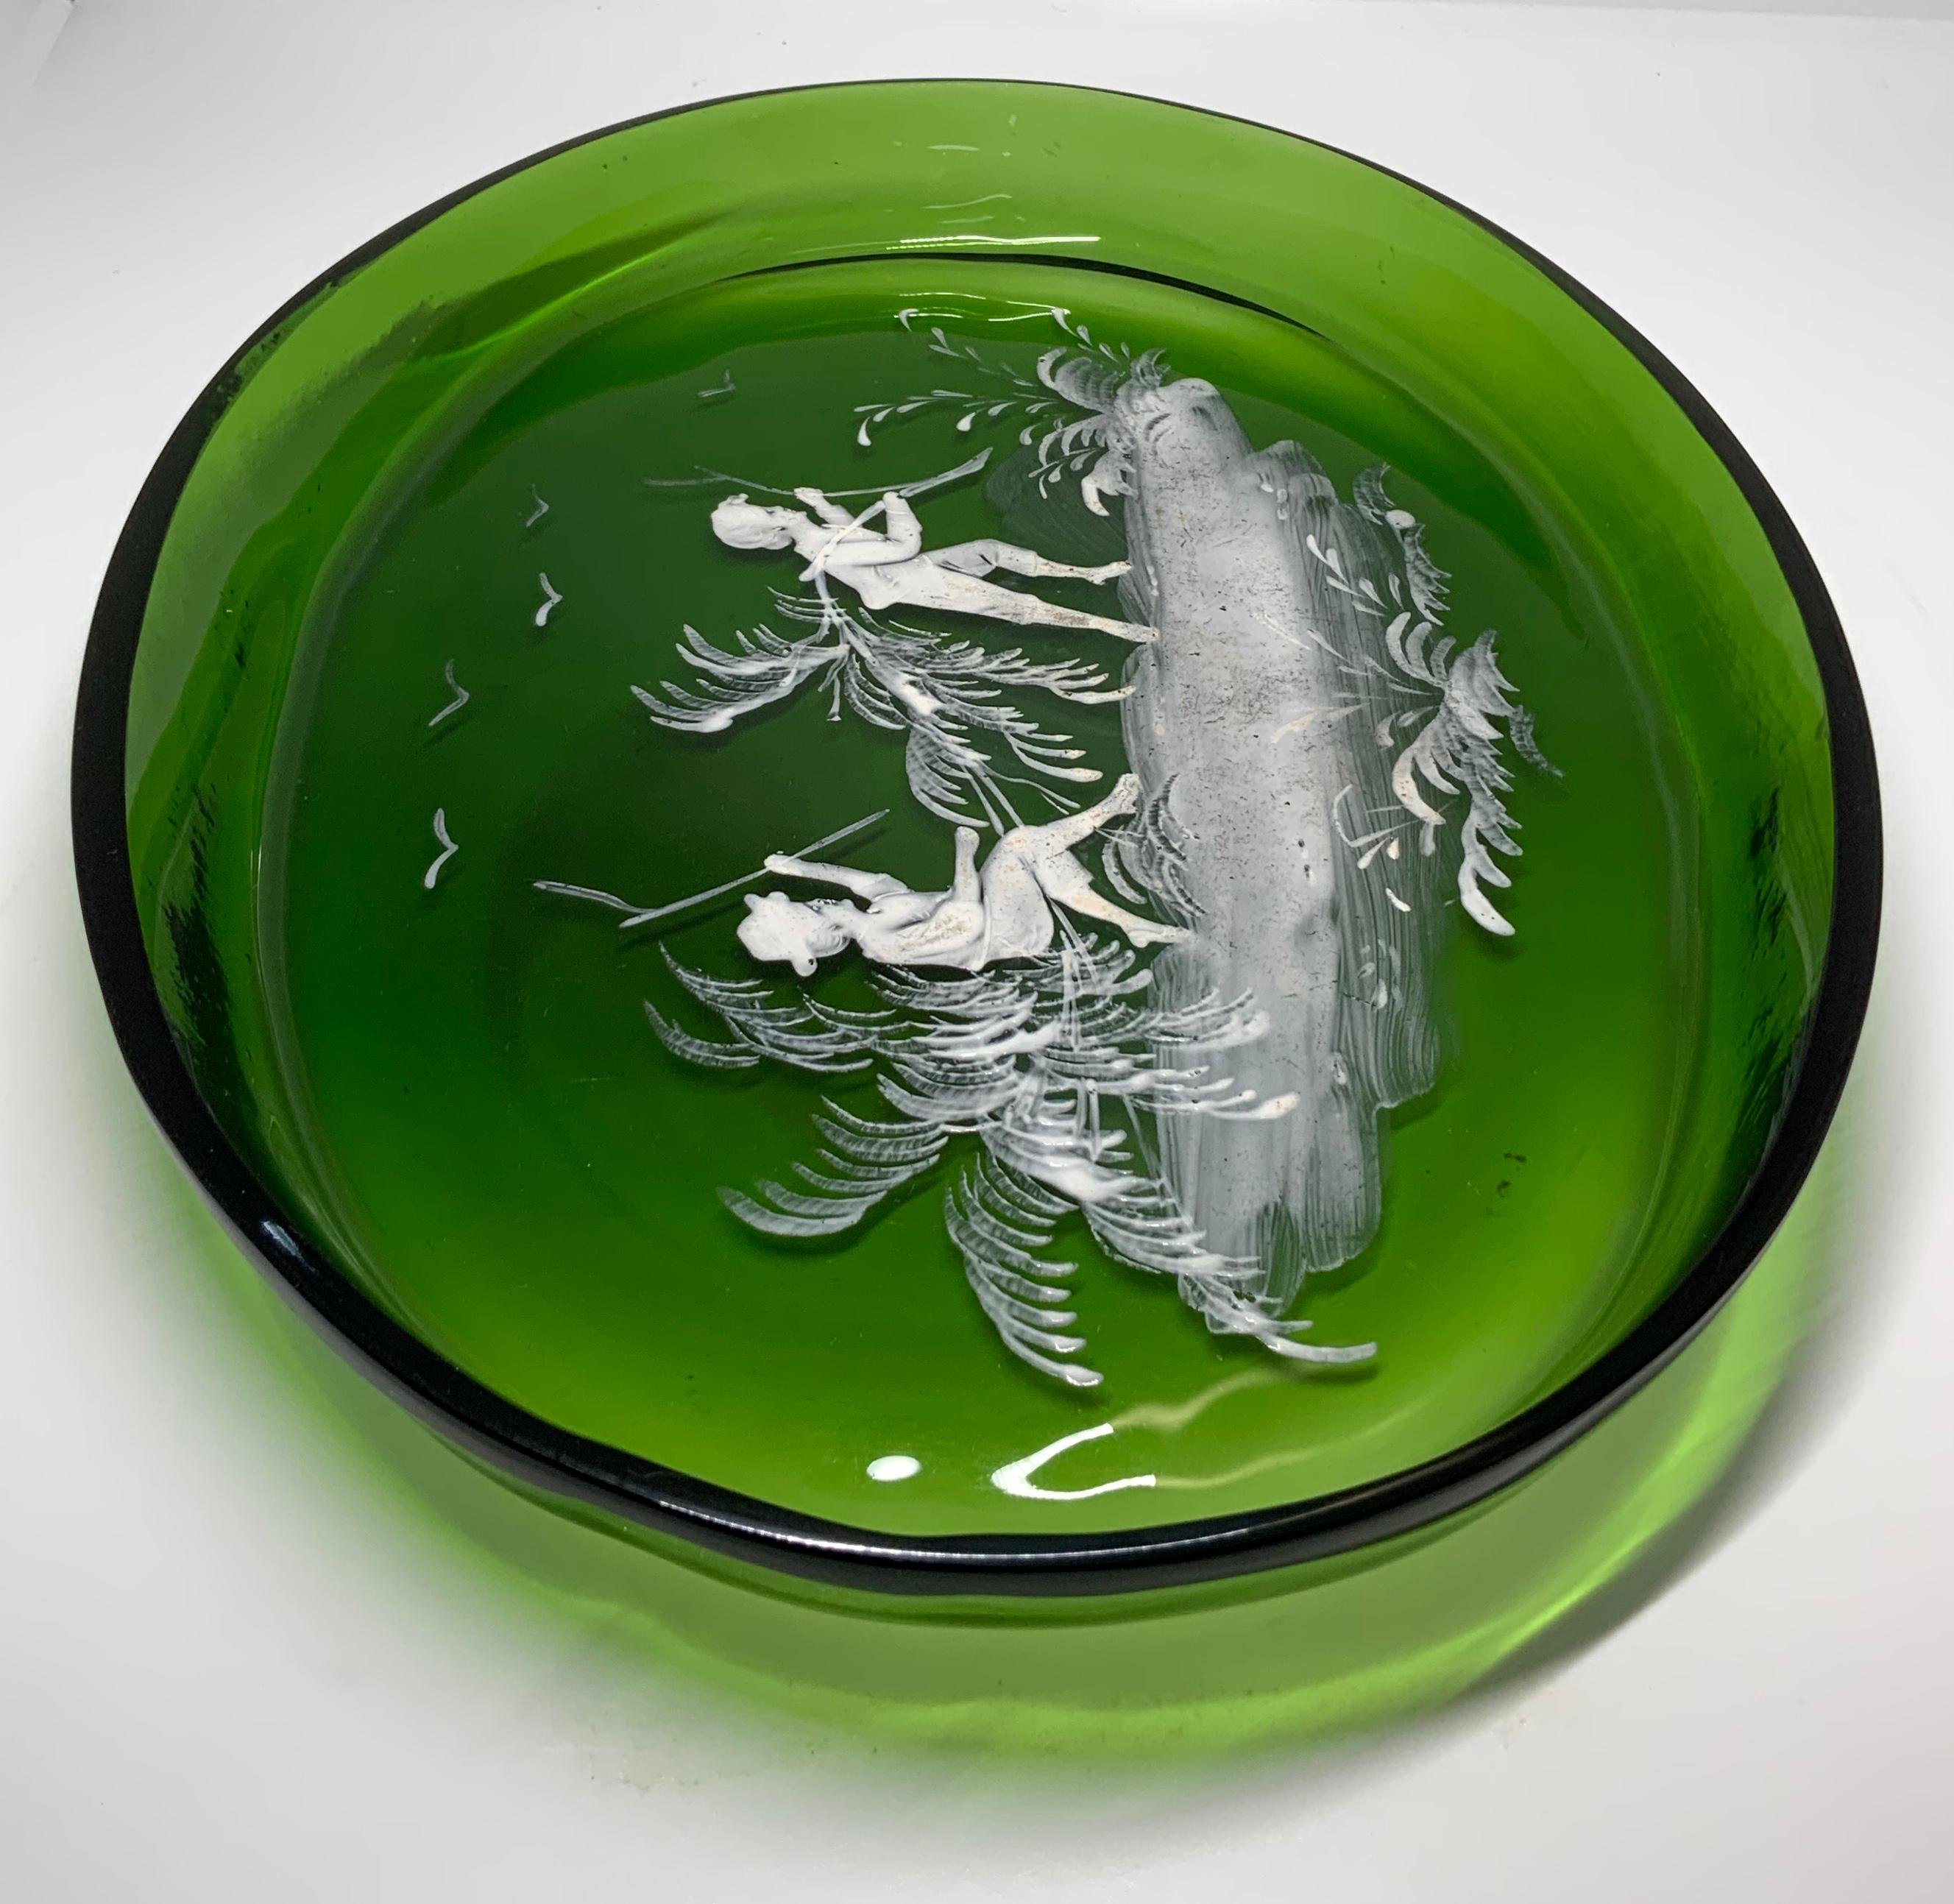 This is a Mary Gregory emerald green glass large oval plate. It is hand painted with white enamel featuring a scene of two boys- one boy is “riding” over a few bamboo branches while the other one is pulling them. There are some birds flying in the